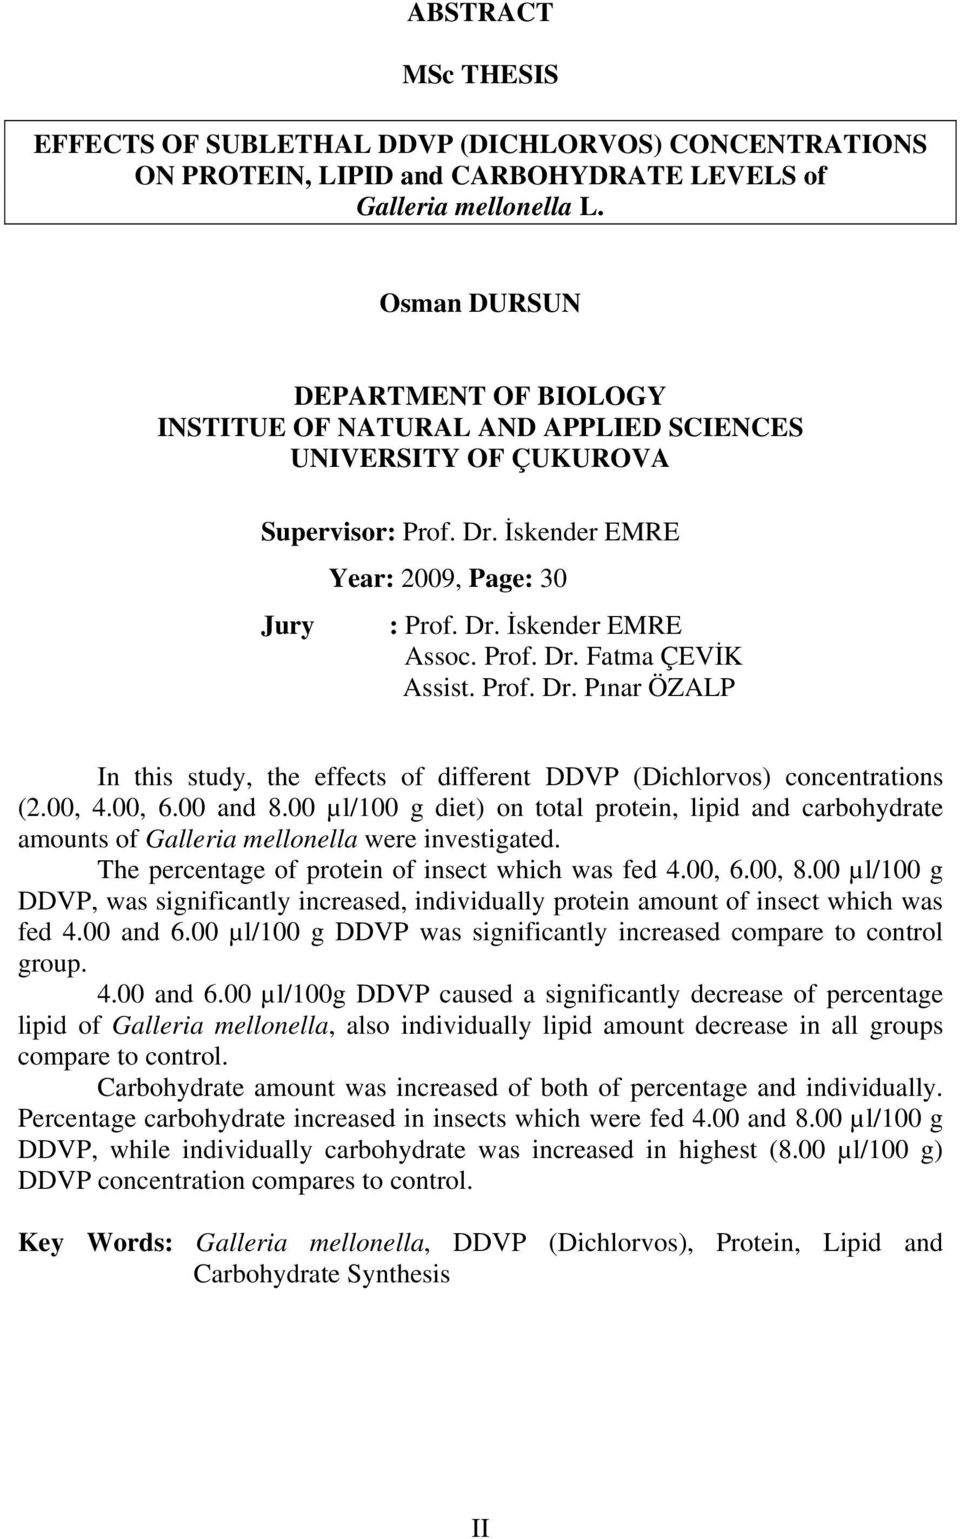 Prof. Dr. Pınar ÖZALP In this study, the effects of different DDVP (Dichlorvos) concentrations (2.00, 4.00, 6.00 and 8.